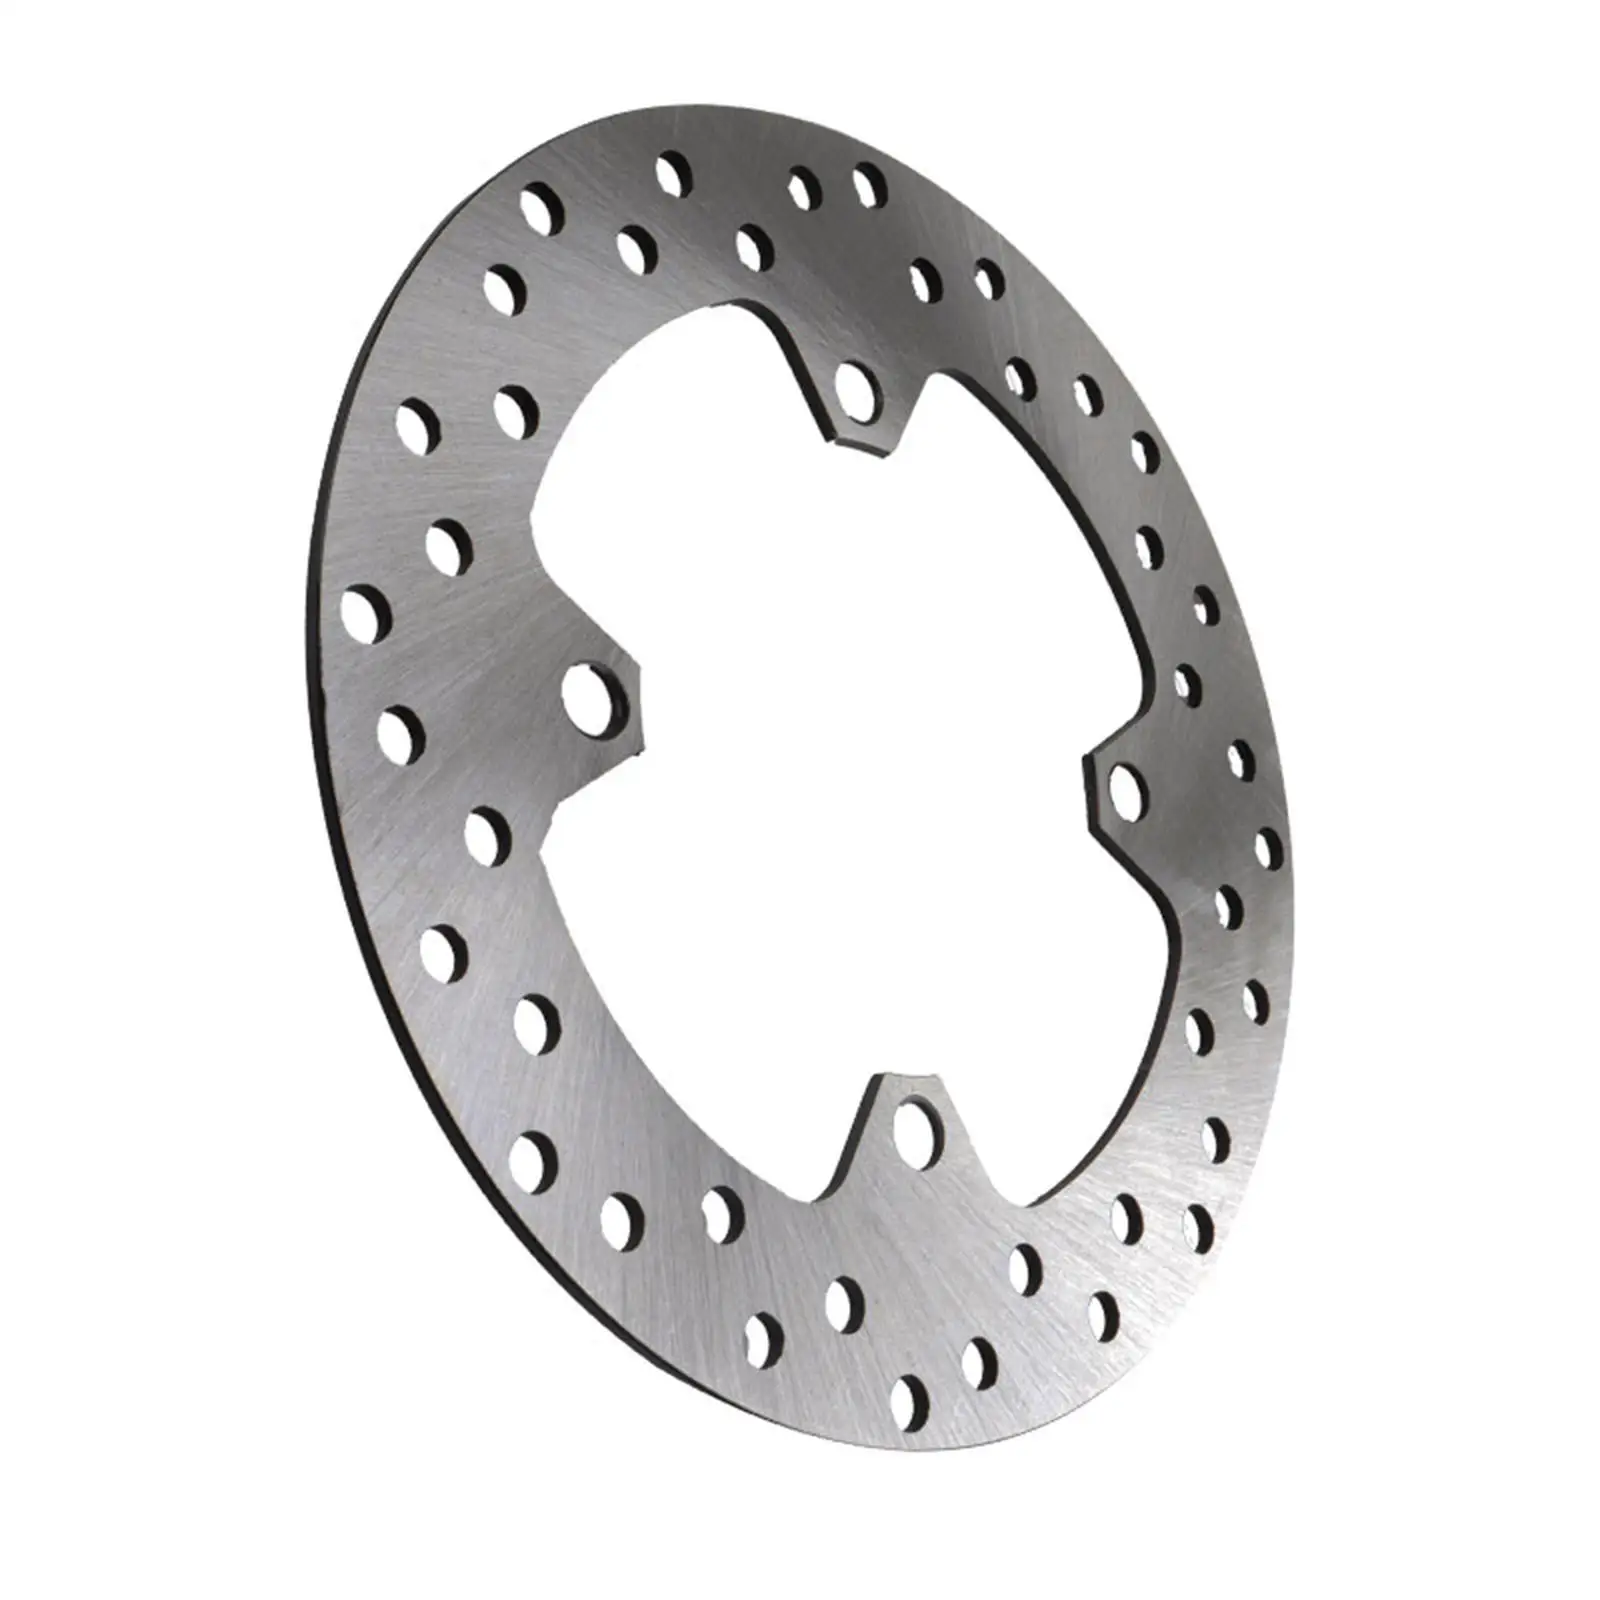 Brake Disc Rotor Direct Replaces Wear Resistant Easy Installation Spare Parts for Honda CBR125R Xlv Varasx125 XR400 TRX400x